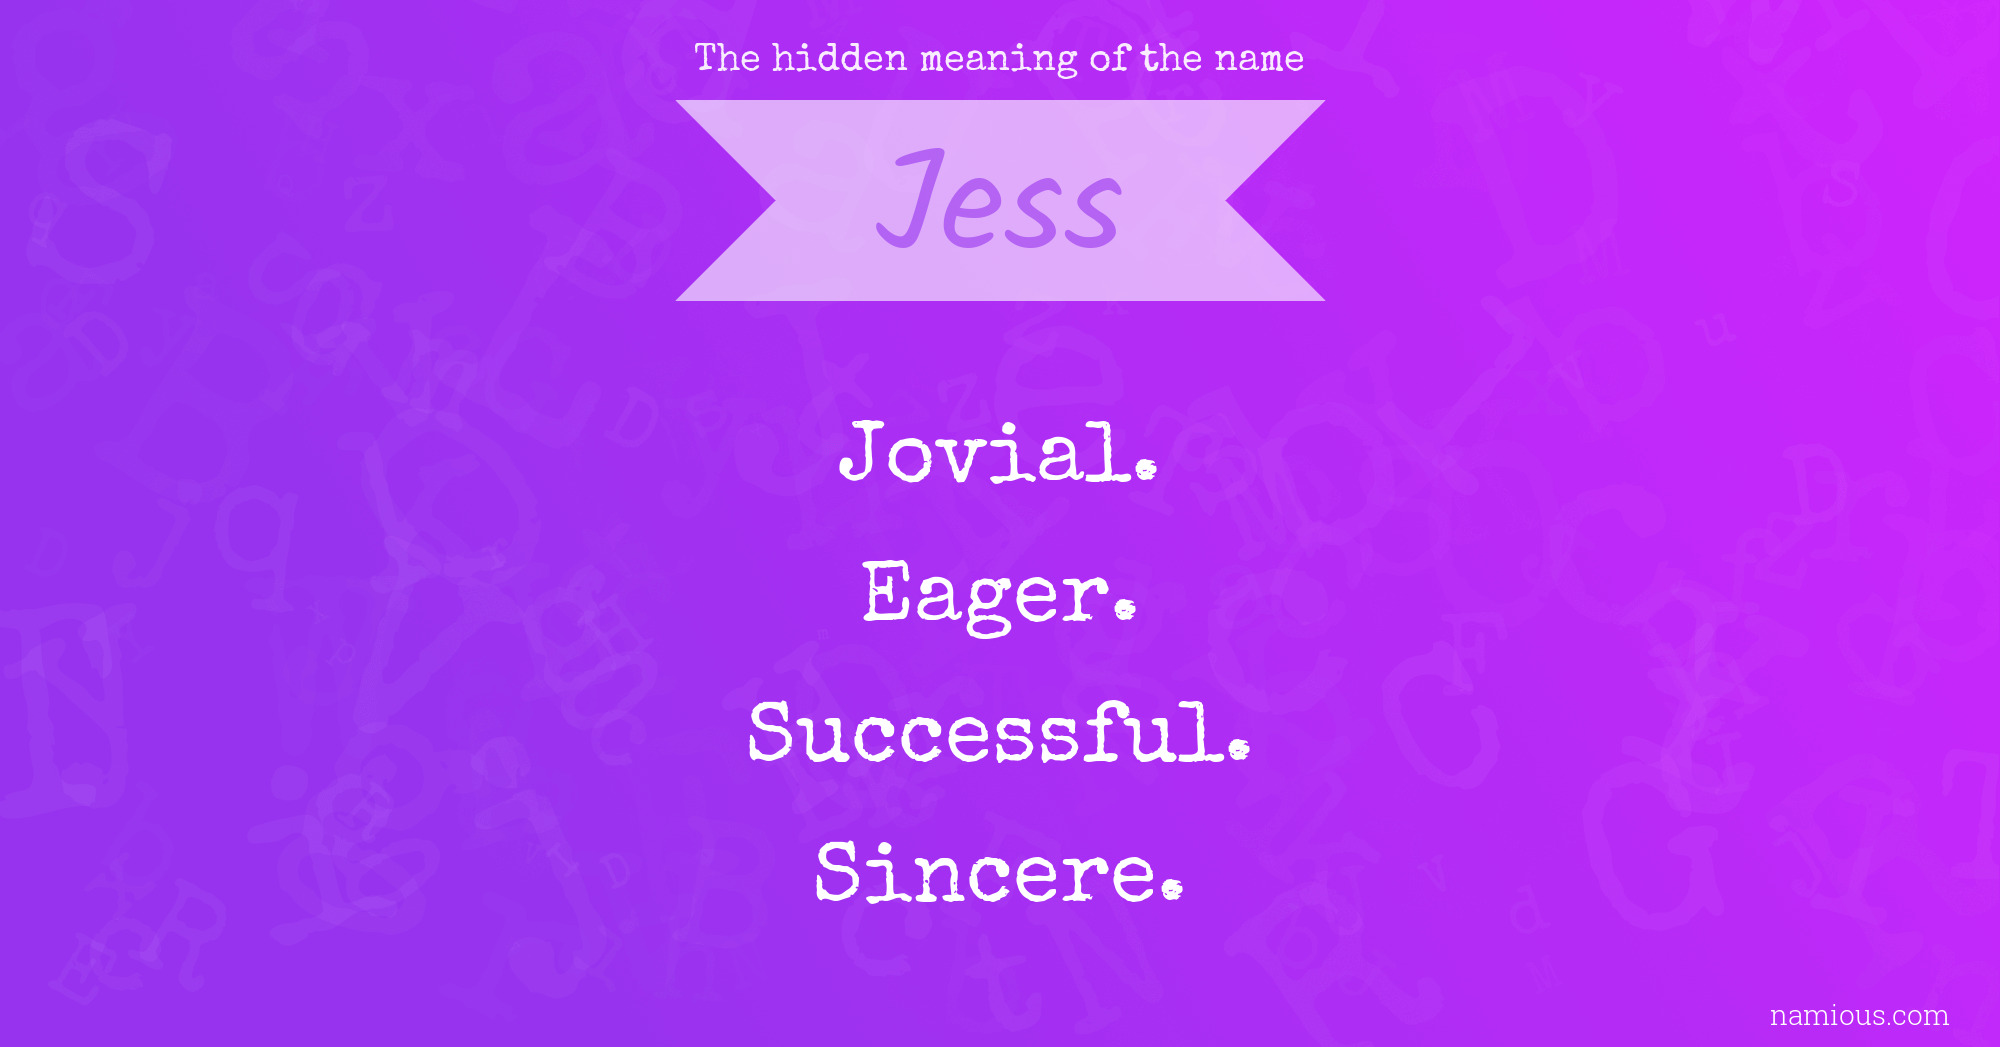 The hidden meaning of the name Jess